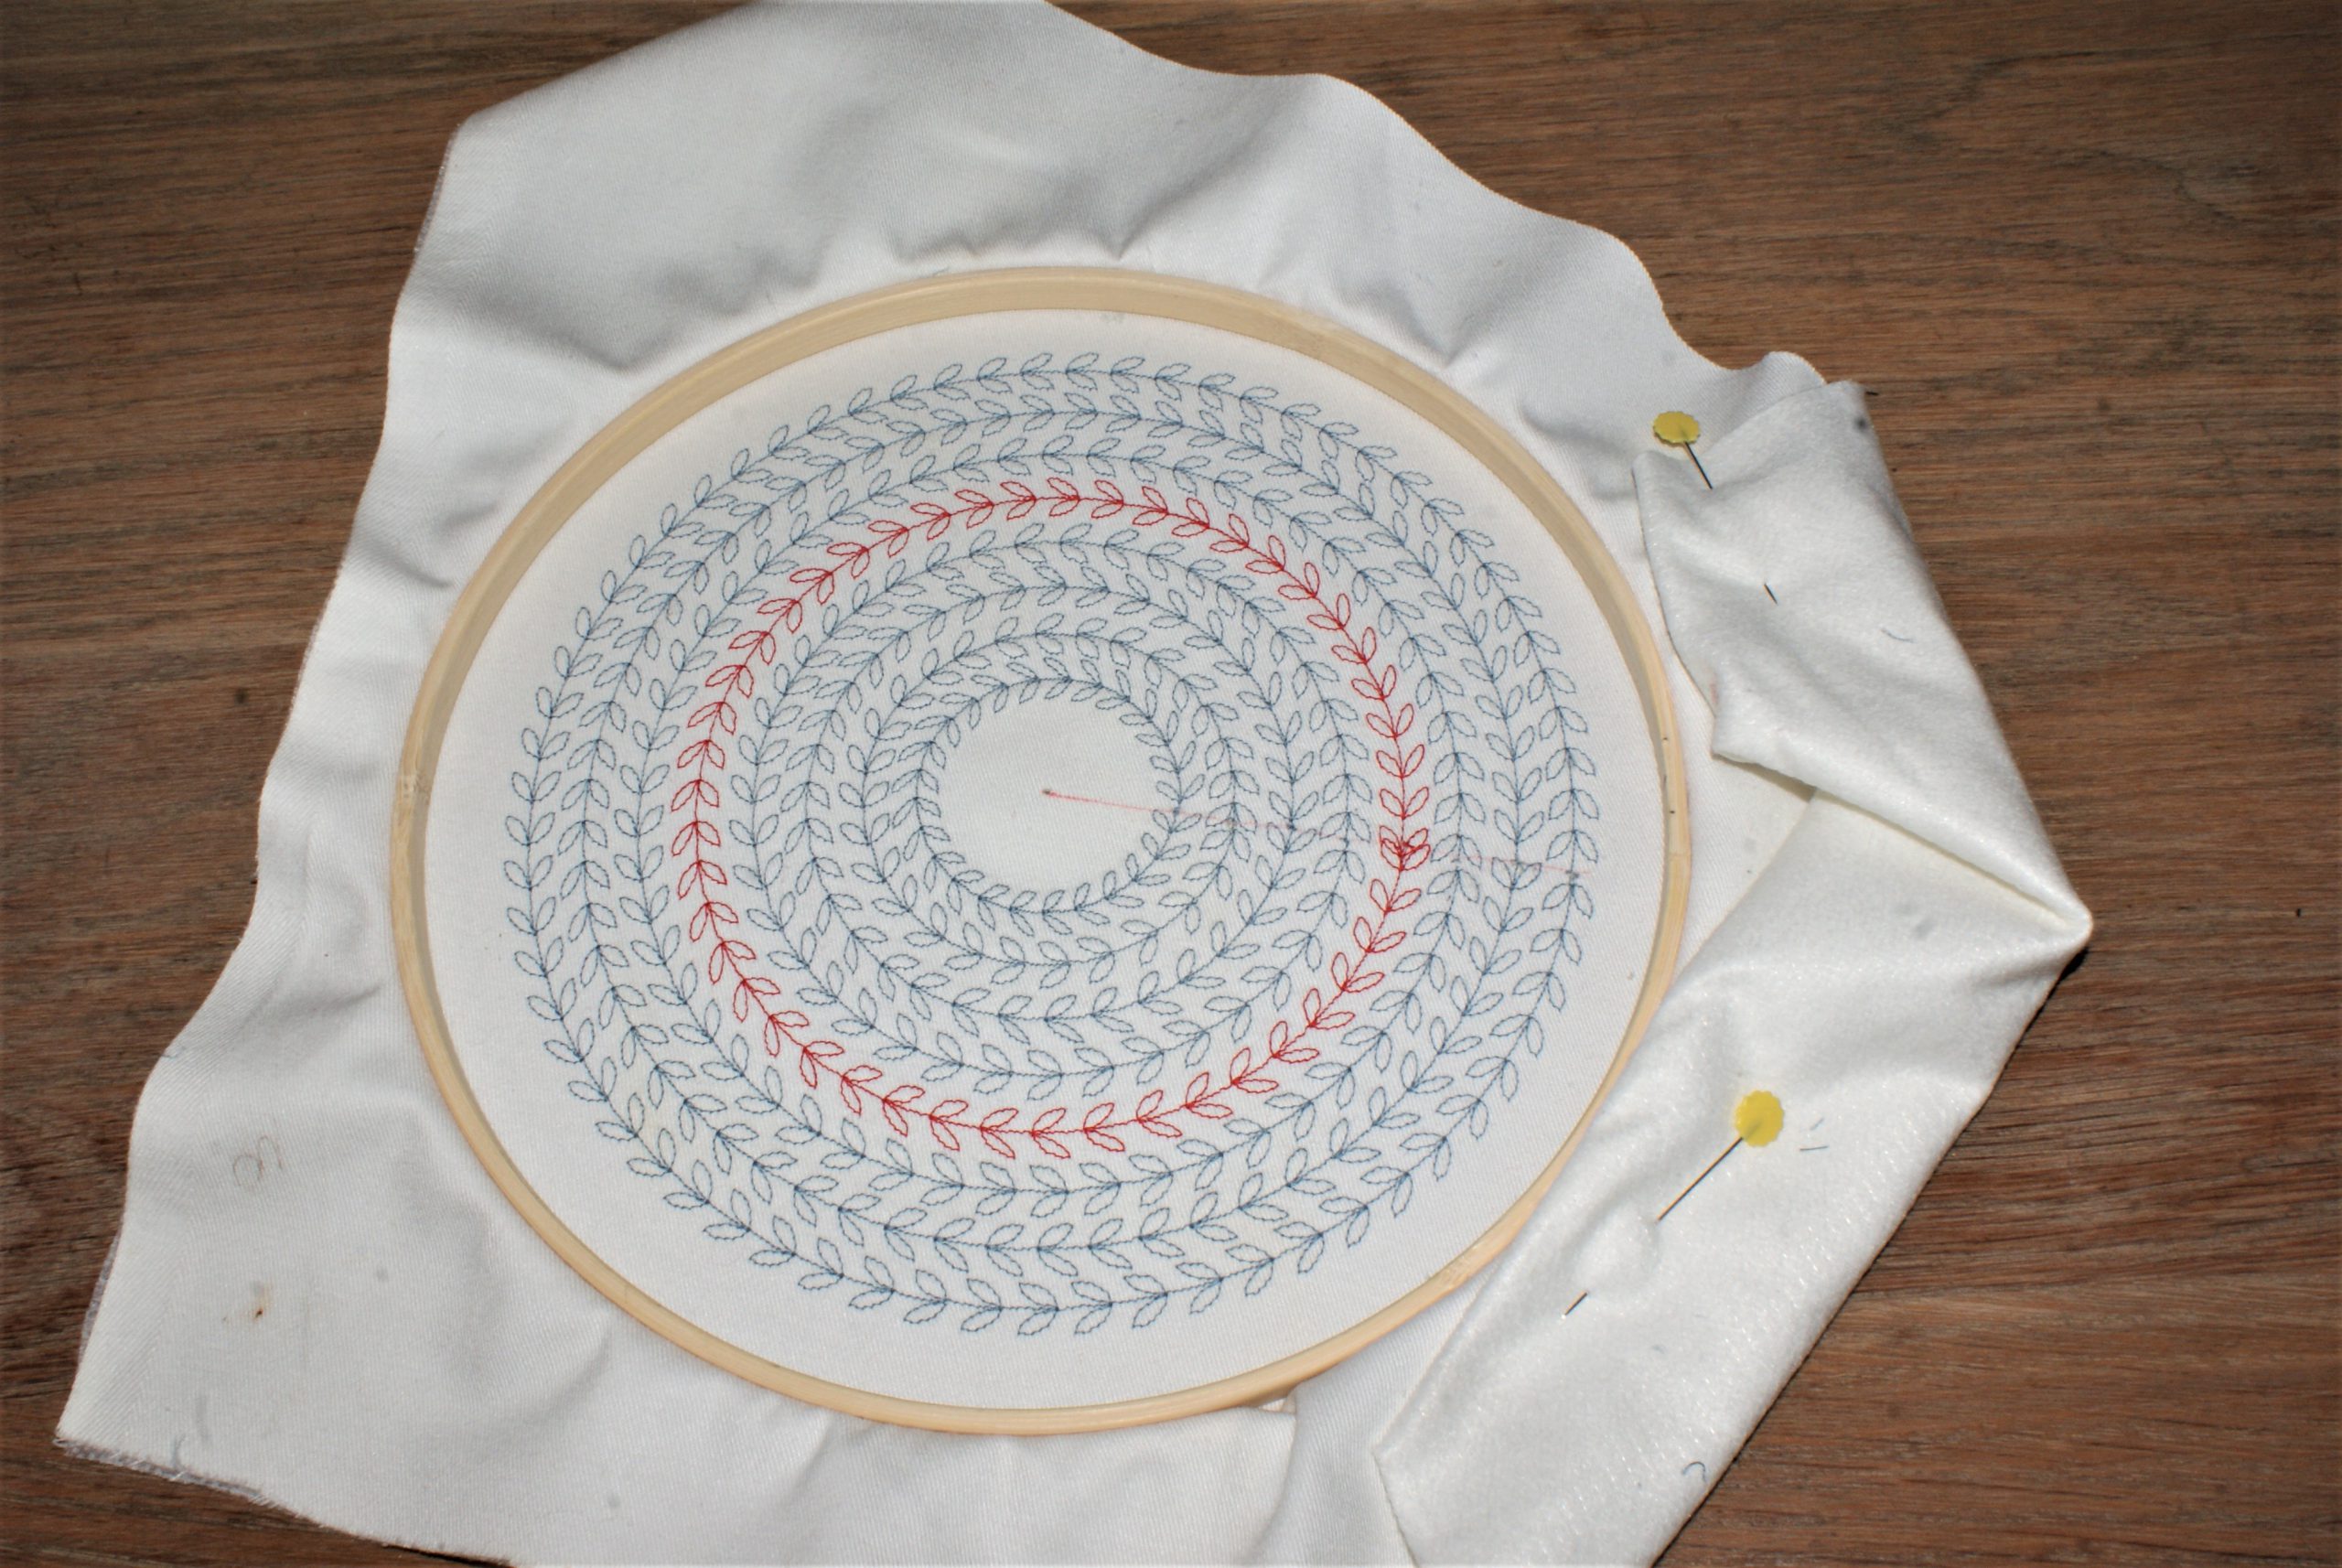 Decorate with the circular embroidery accessory